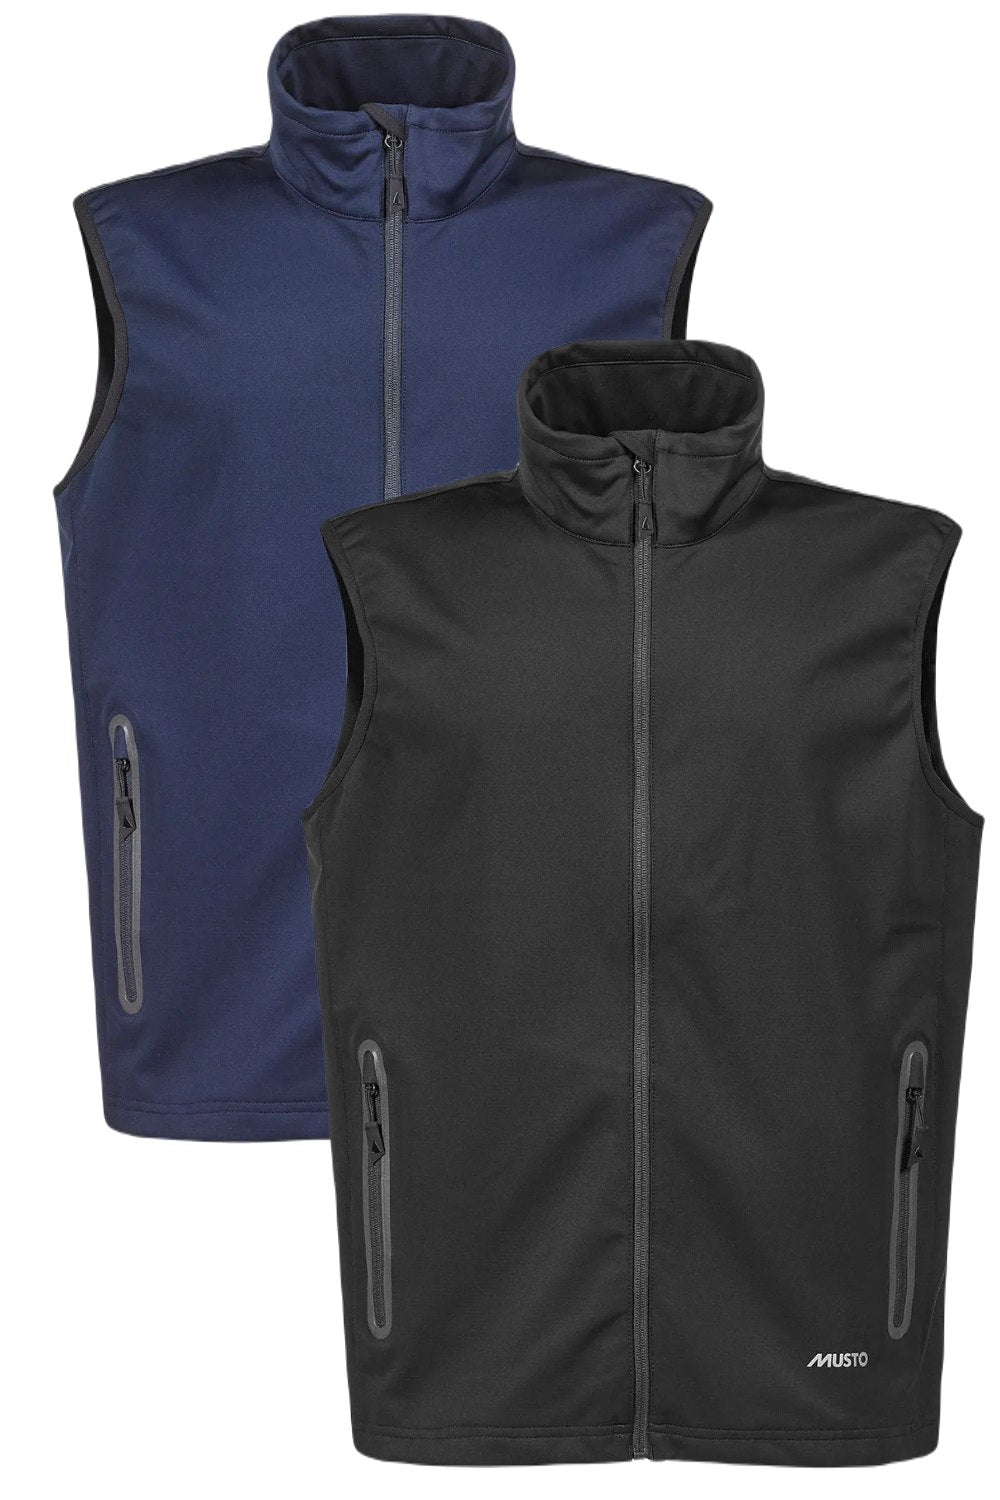 Musto Mens Essential Softshell Gilet in Navy and Black 